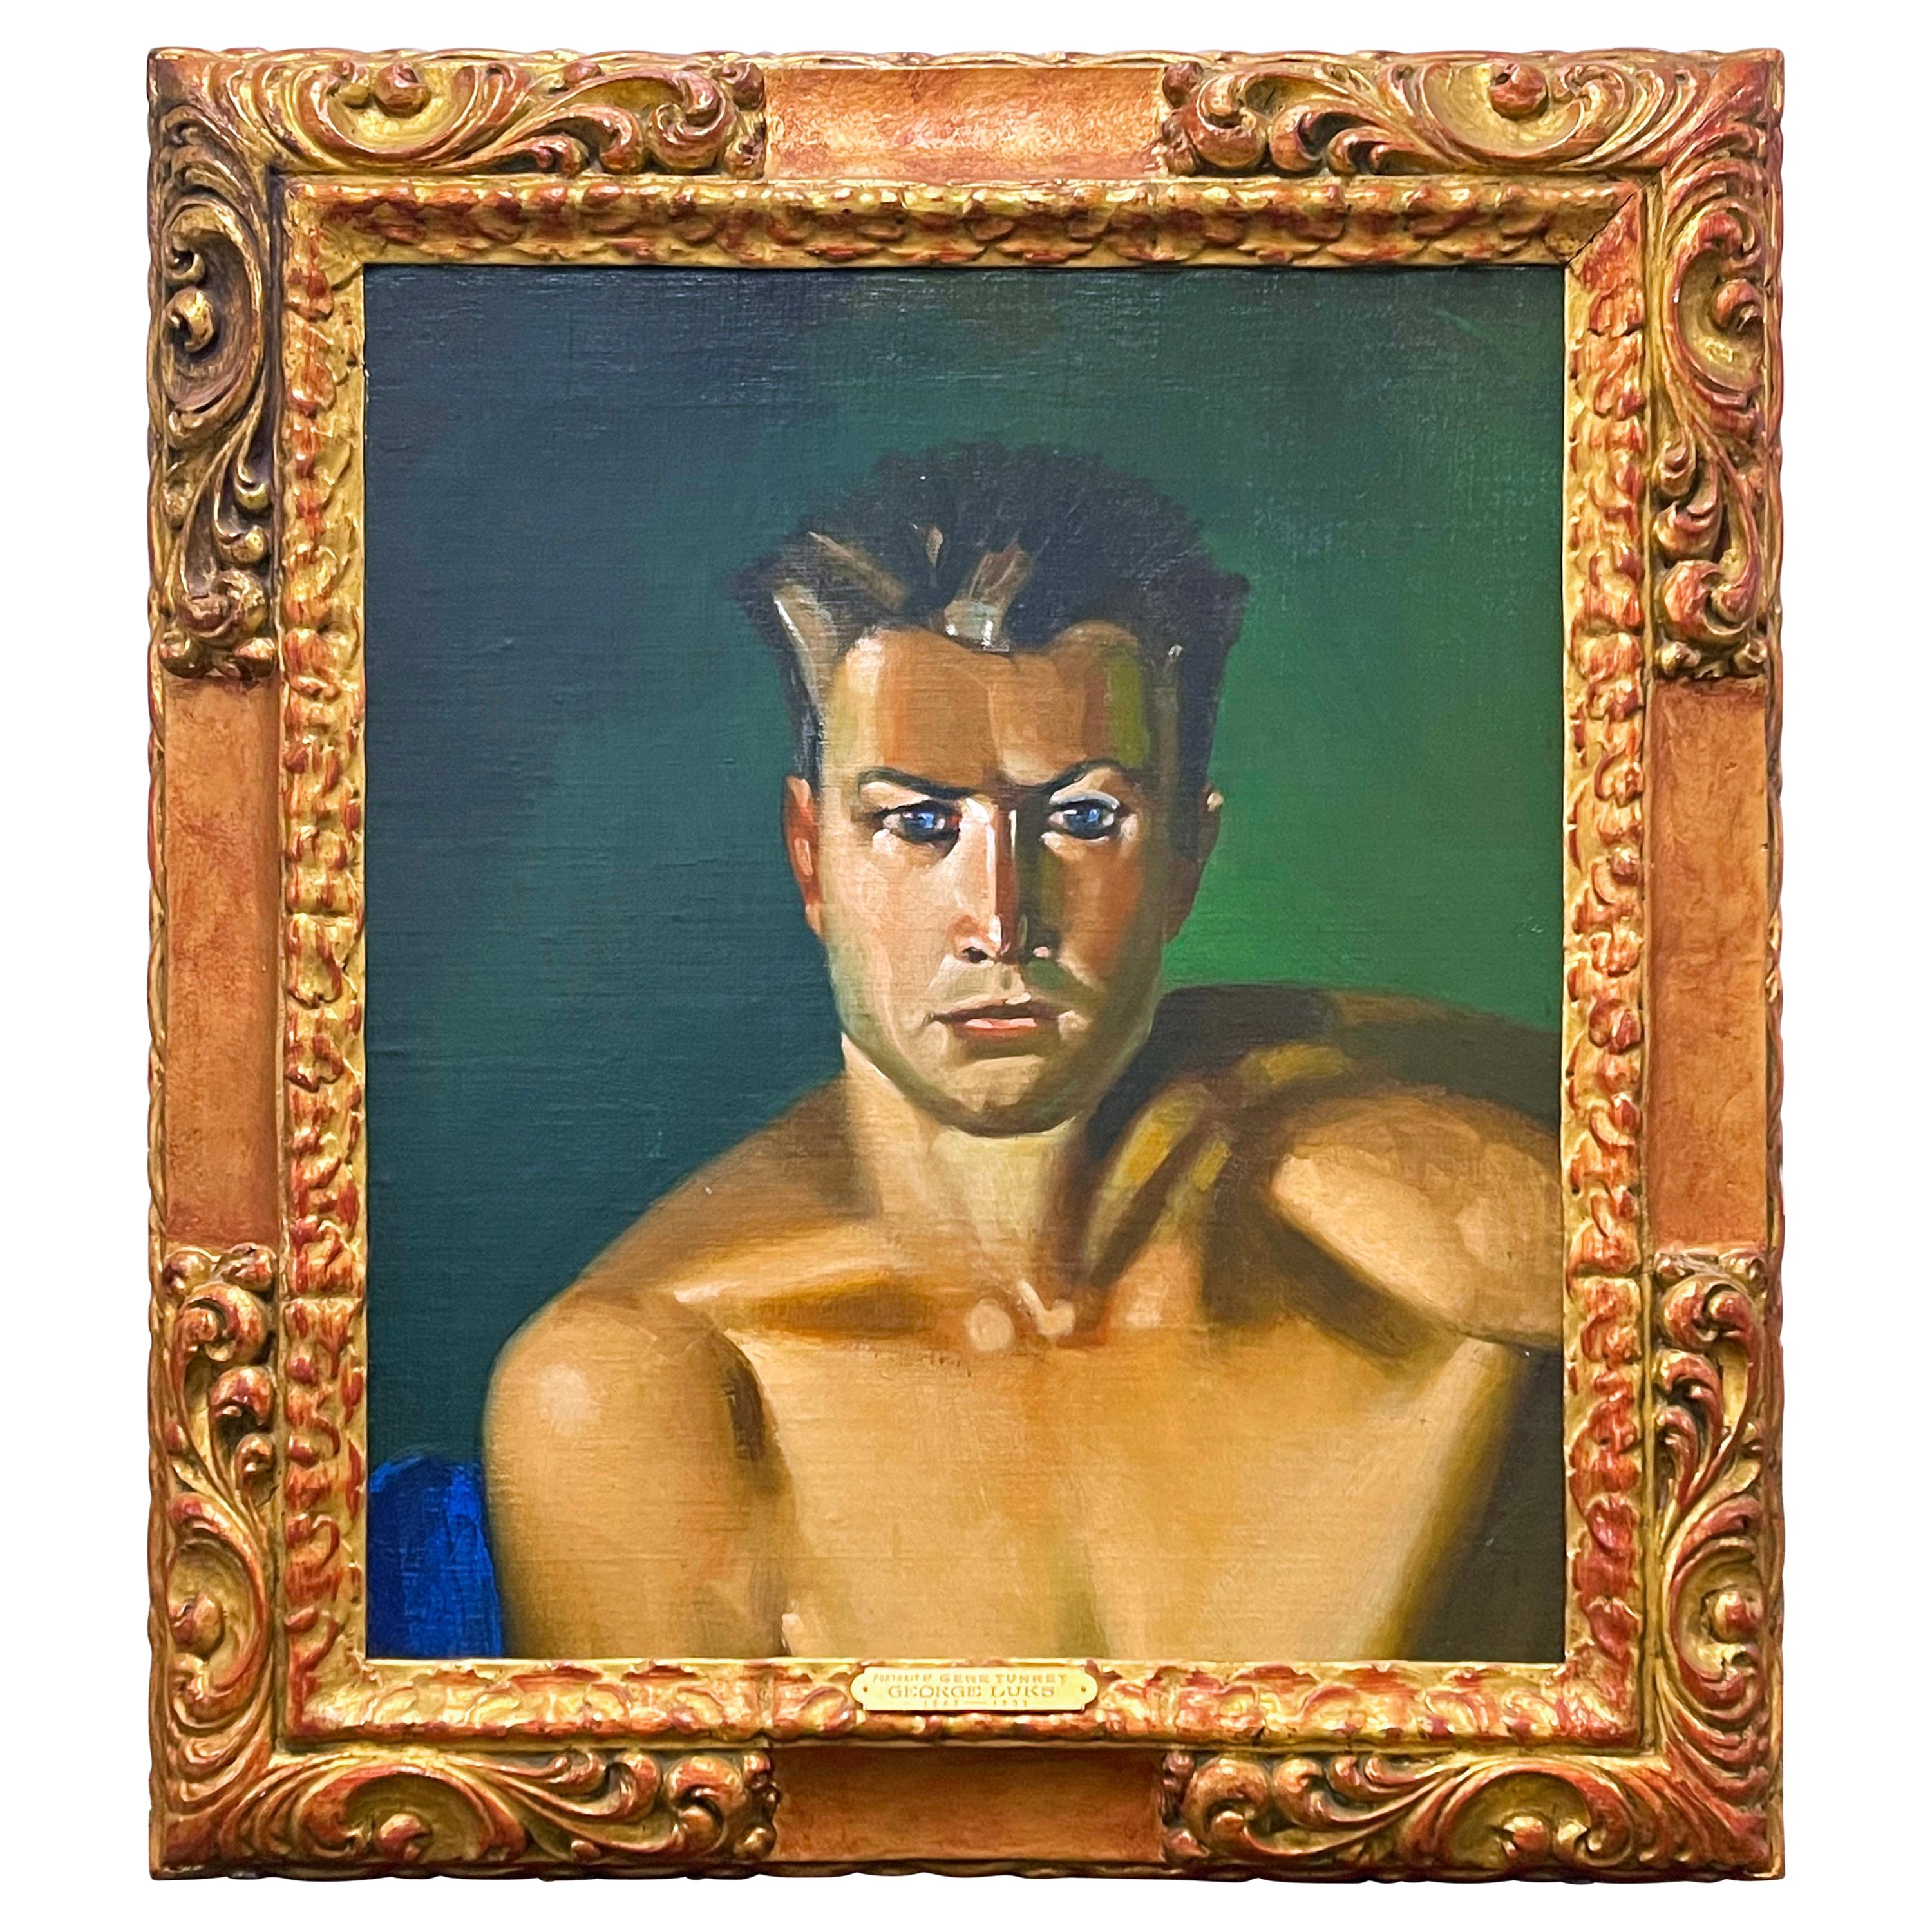 "Portrait of Gene Tunney, " Striking, Important Painting of Boxing Legend by Luks